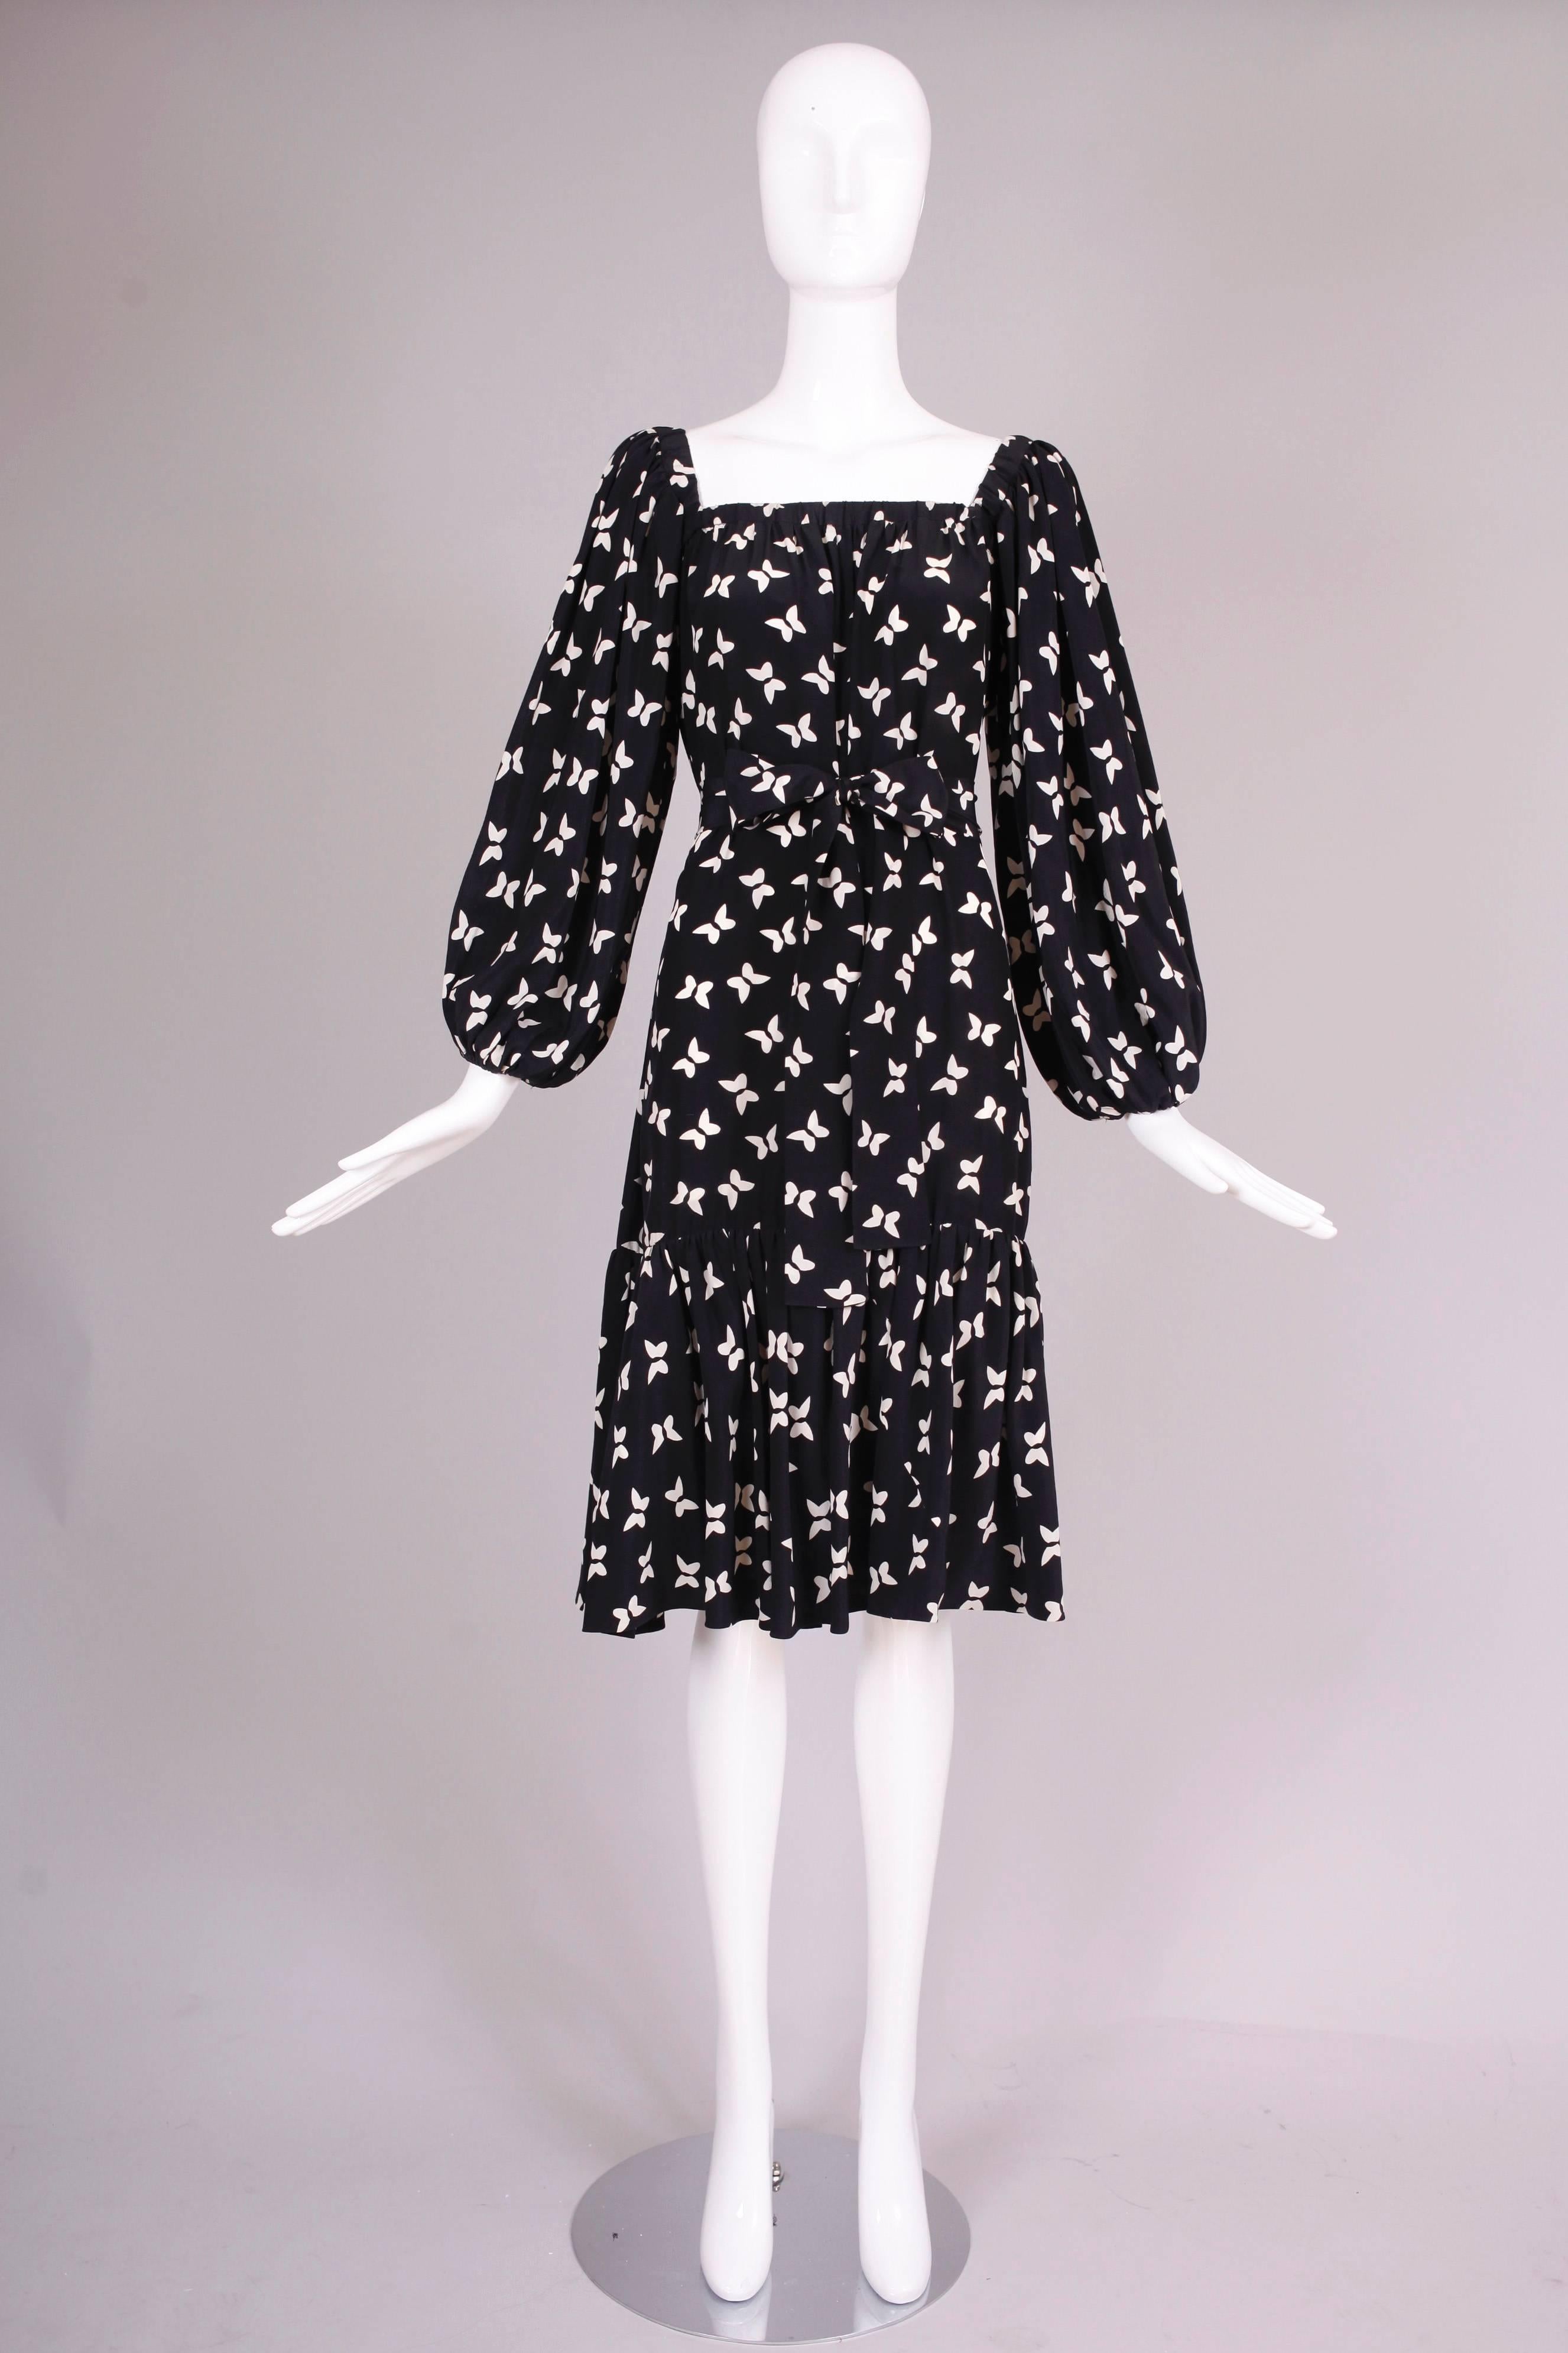 A 1970's Yves Saint Laurent black silk day dress with white butterfly print, elasticized square neck, balloon sleeves, a 2.5